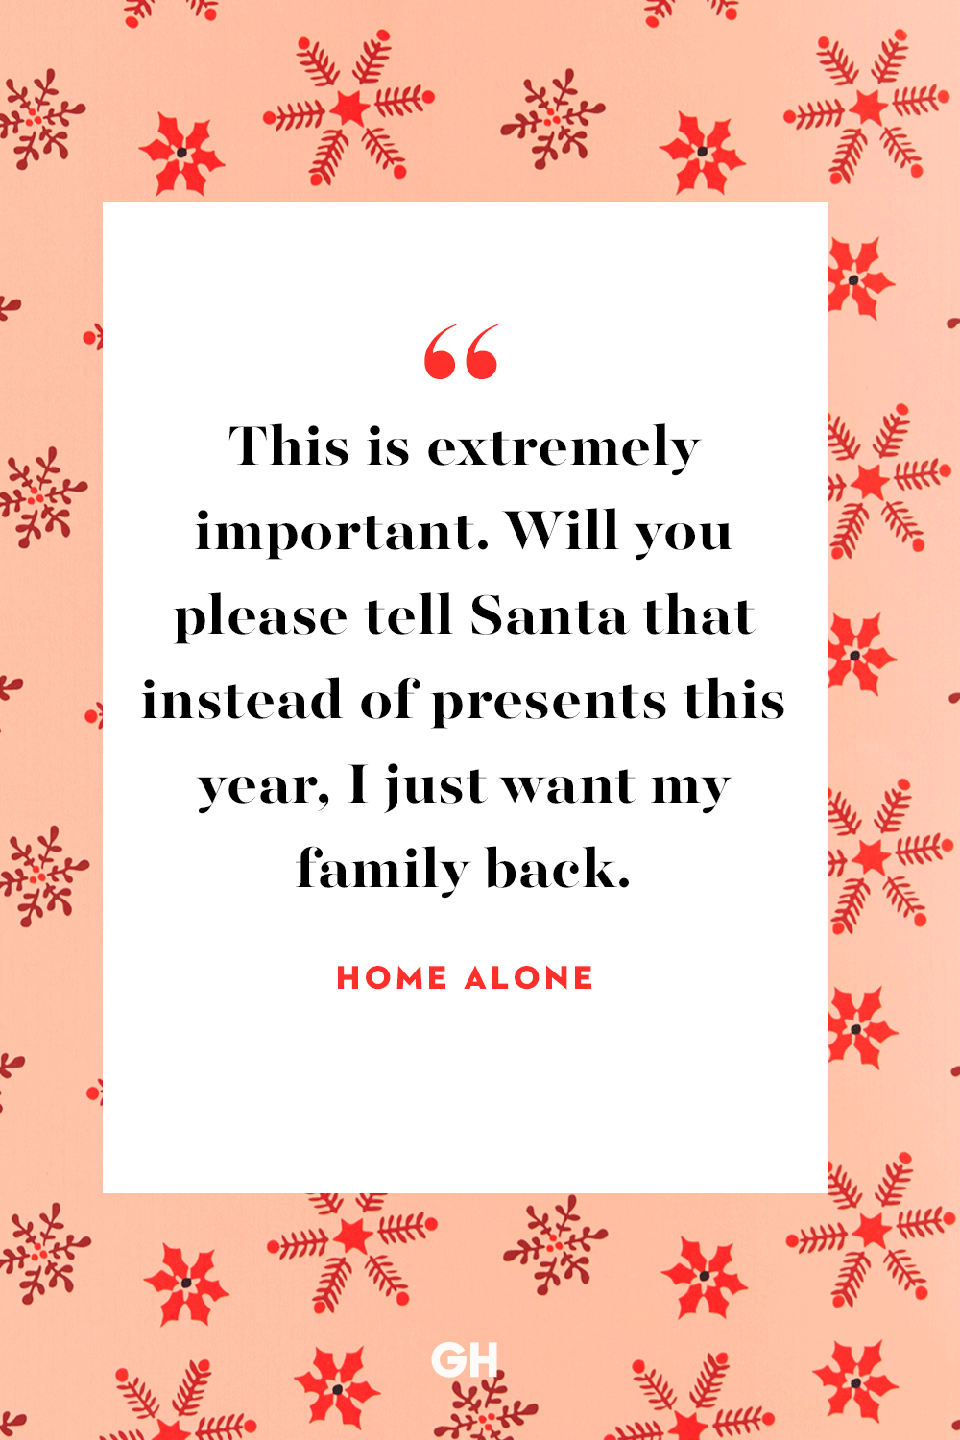 <p>This is extremely important. Will you please tell Santa that instead of presents this year, I just want my family back.</p>